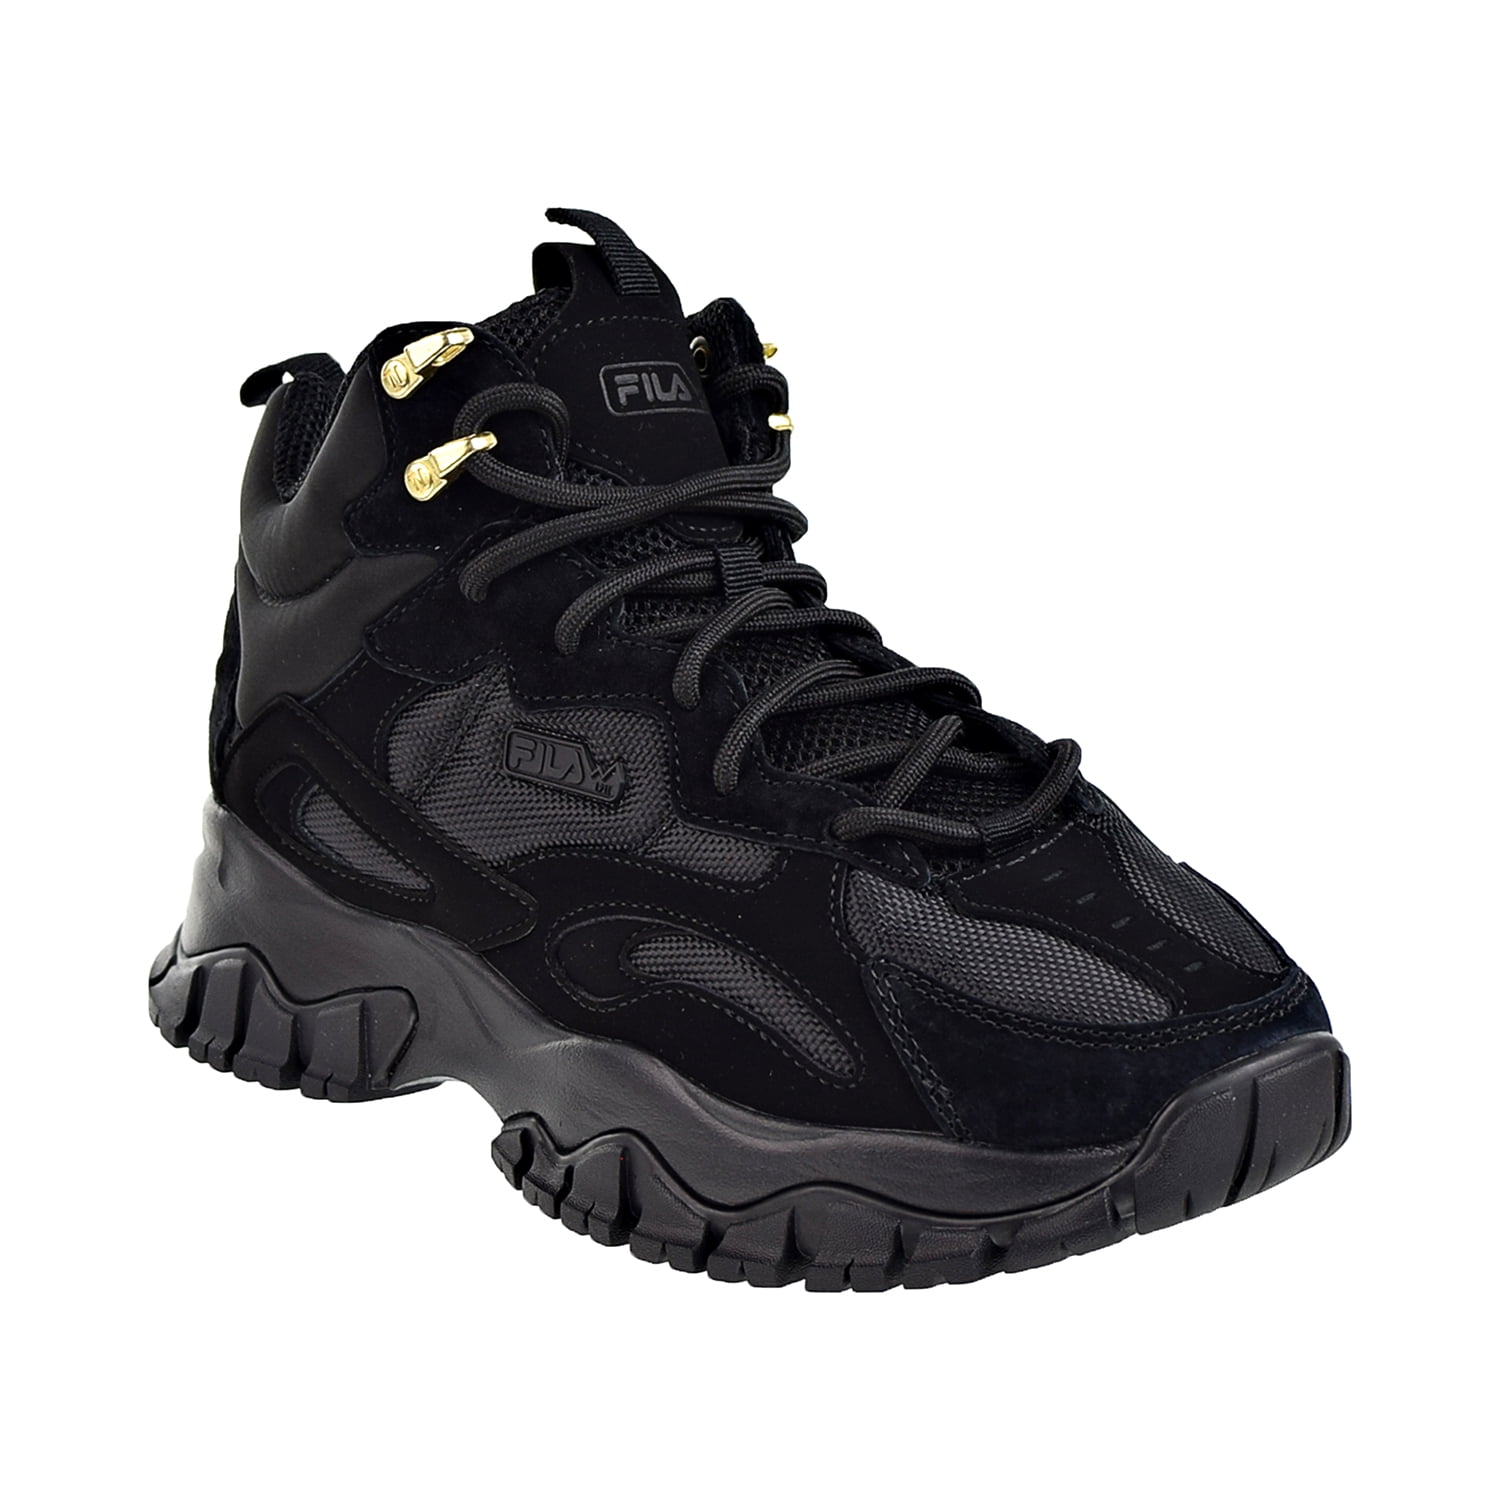 Fila Ray Tracer TR 2 Mid Men's Shoes Black 1rm01332-001